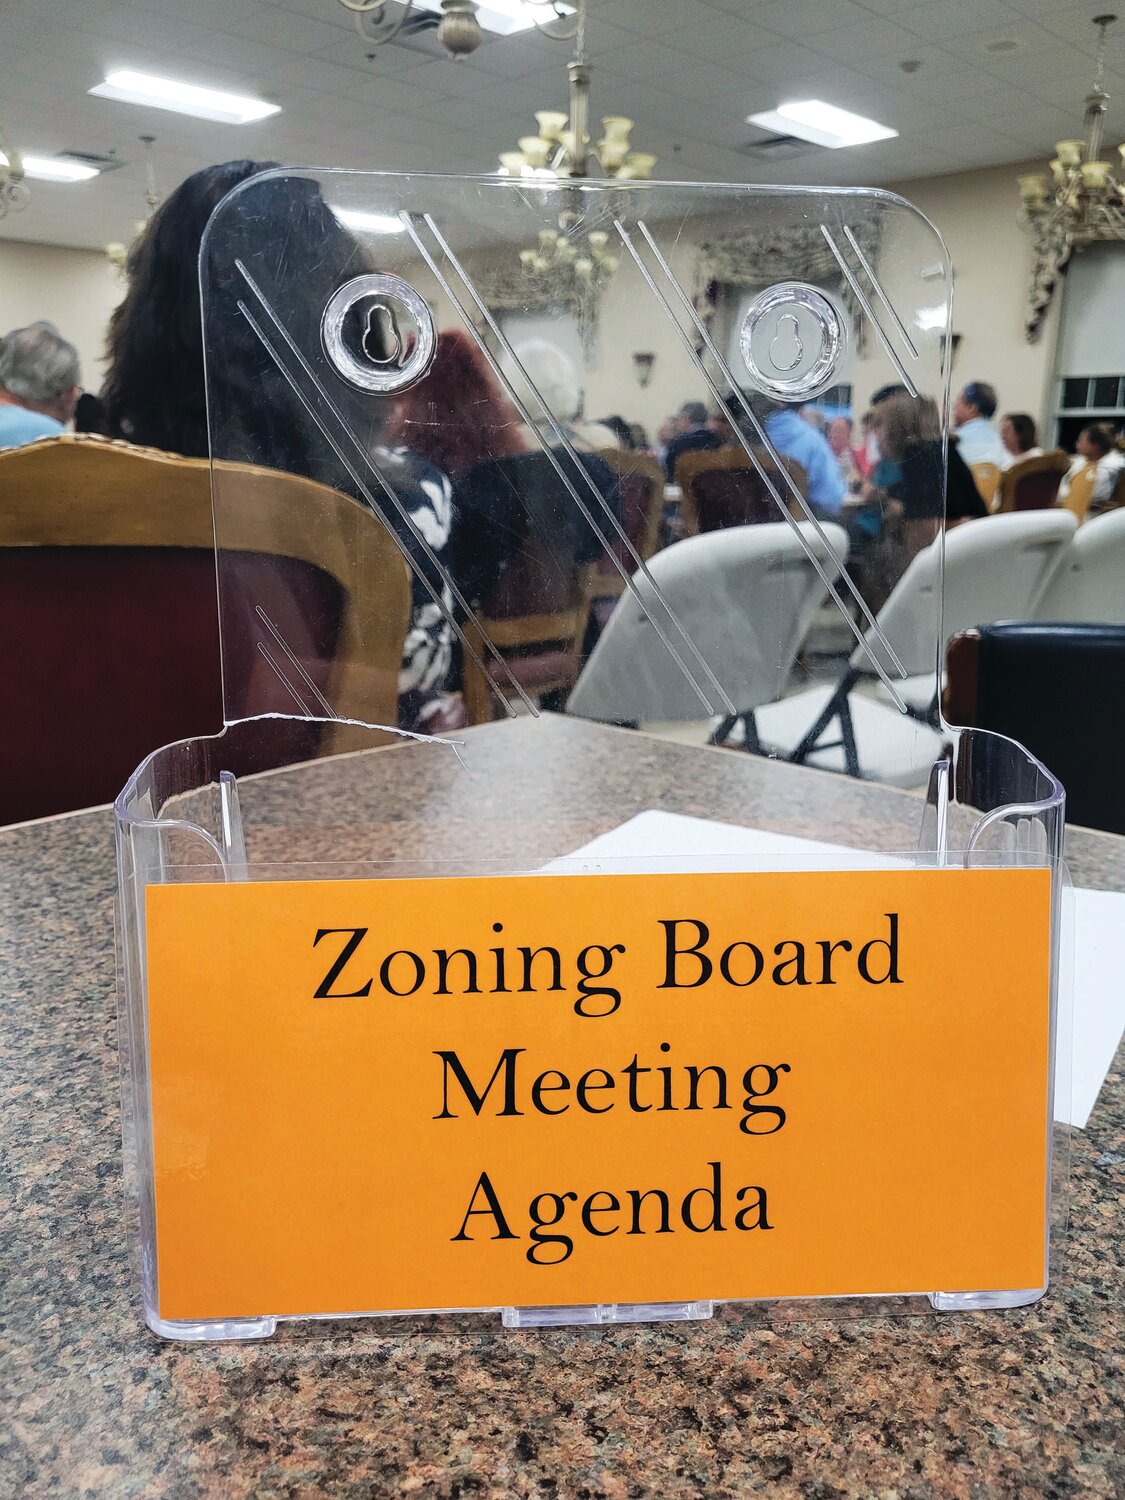 CRAVING SUNSHINE: The agenda rack was picked clean at last Thursday’s Zoning Board meeting. For a while, it was standing-room-only at the Senior Center.